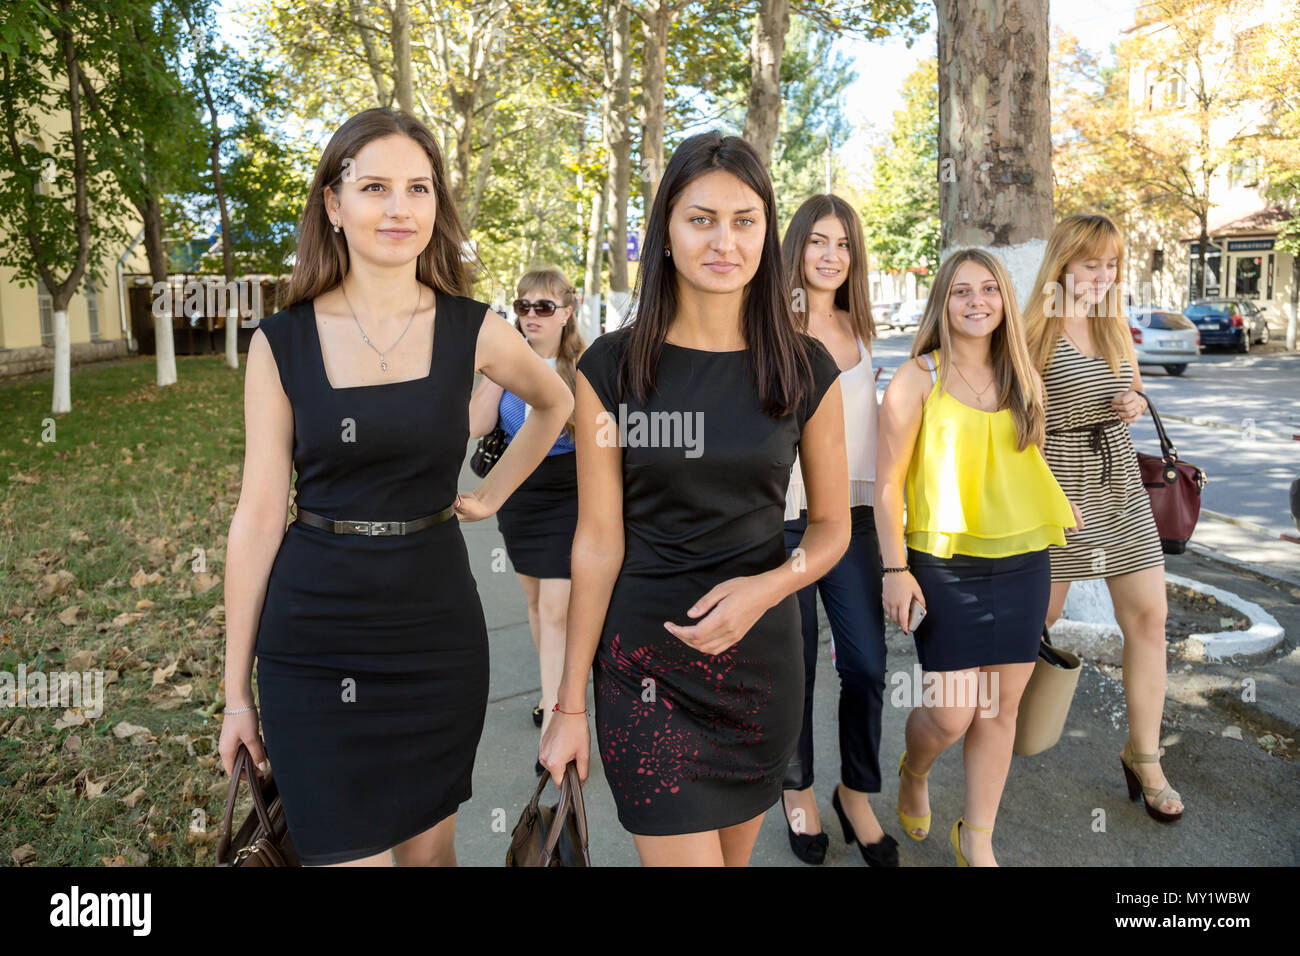 https://c8.alamy.com/comp/MY1WBW/chisinau-moldova-female-students-on-the-first-day-of-the-new-academic-year-MY1WBW.jpg